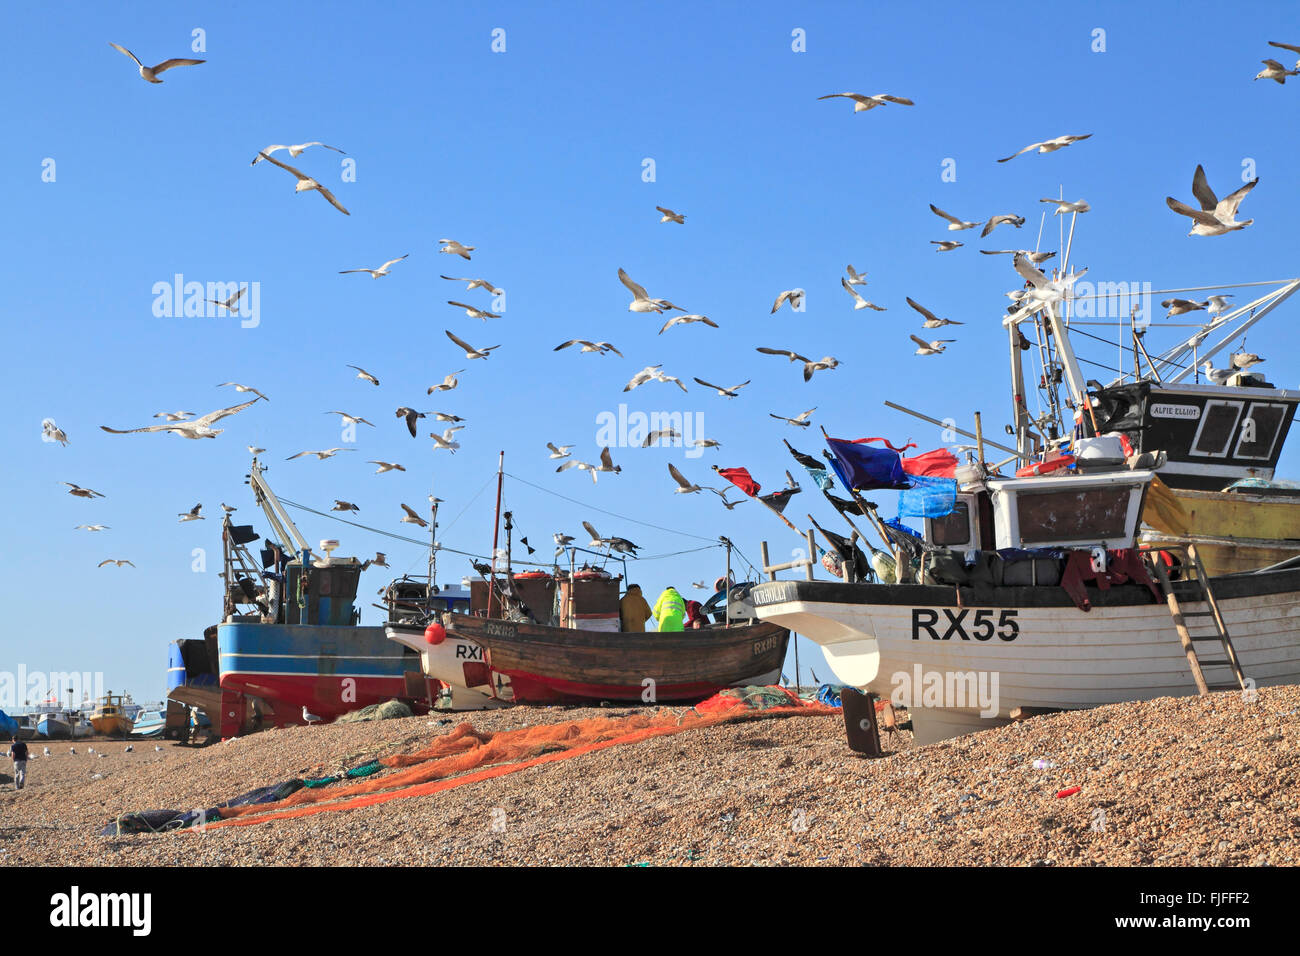 Hastings seagulls wheel over the fishing boats on the Stade fishermen's beach, as the fishermen sort their catch of fish, East Sussex, England, UK, GB Stock Photo